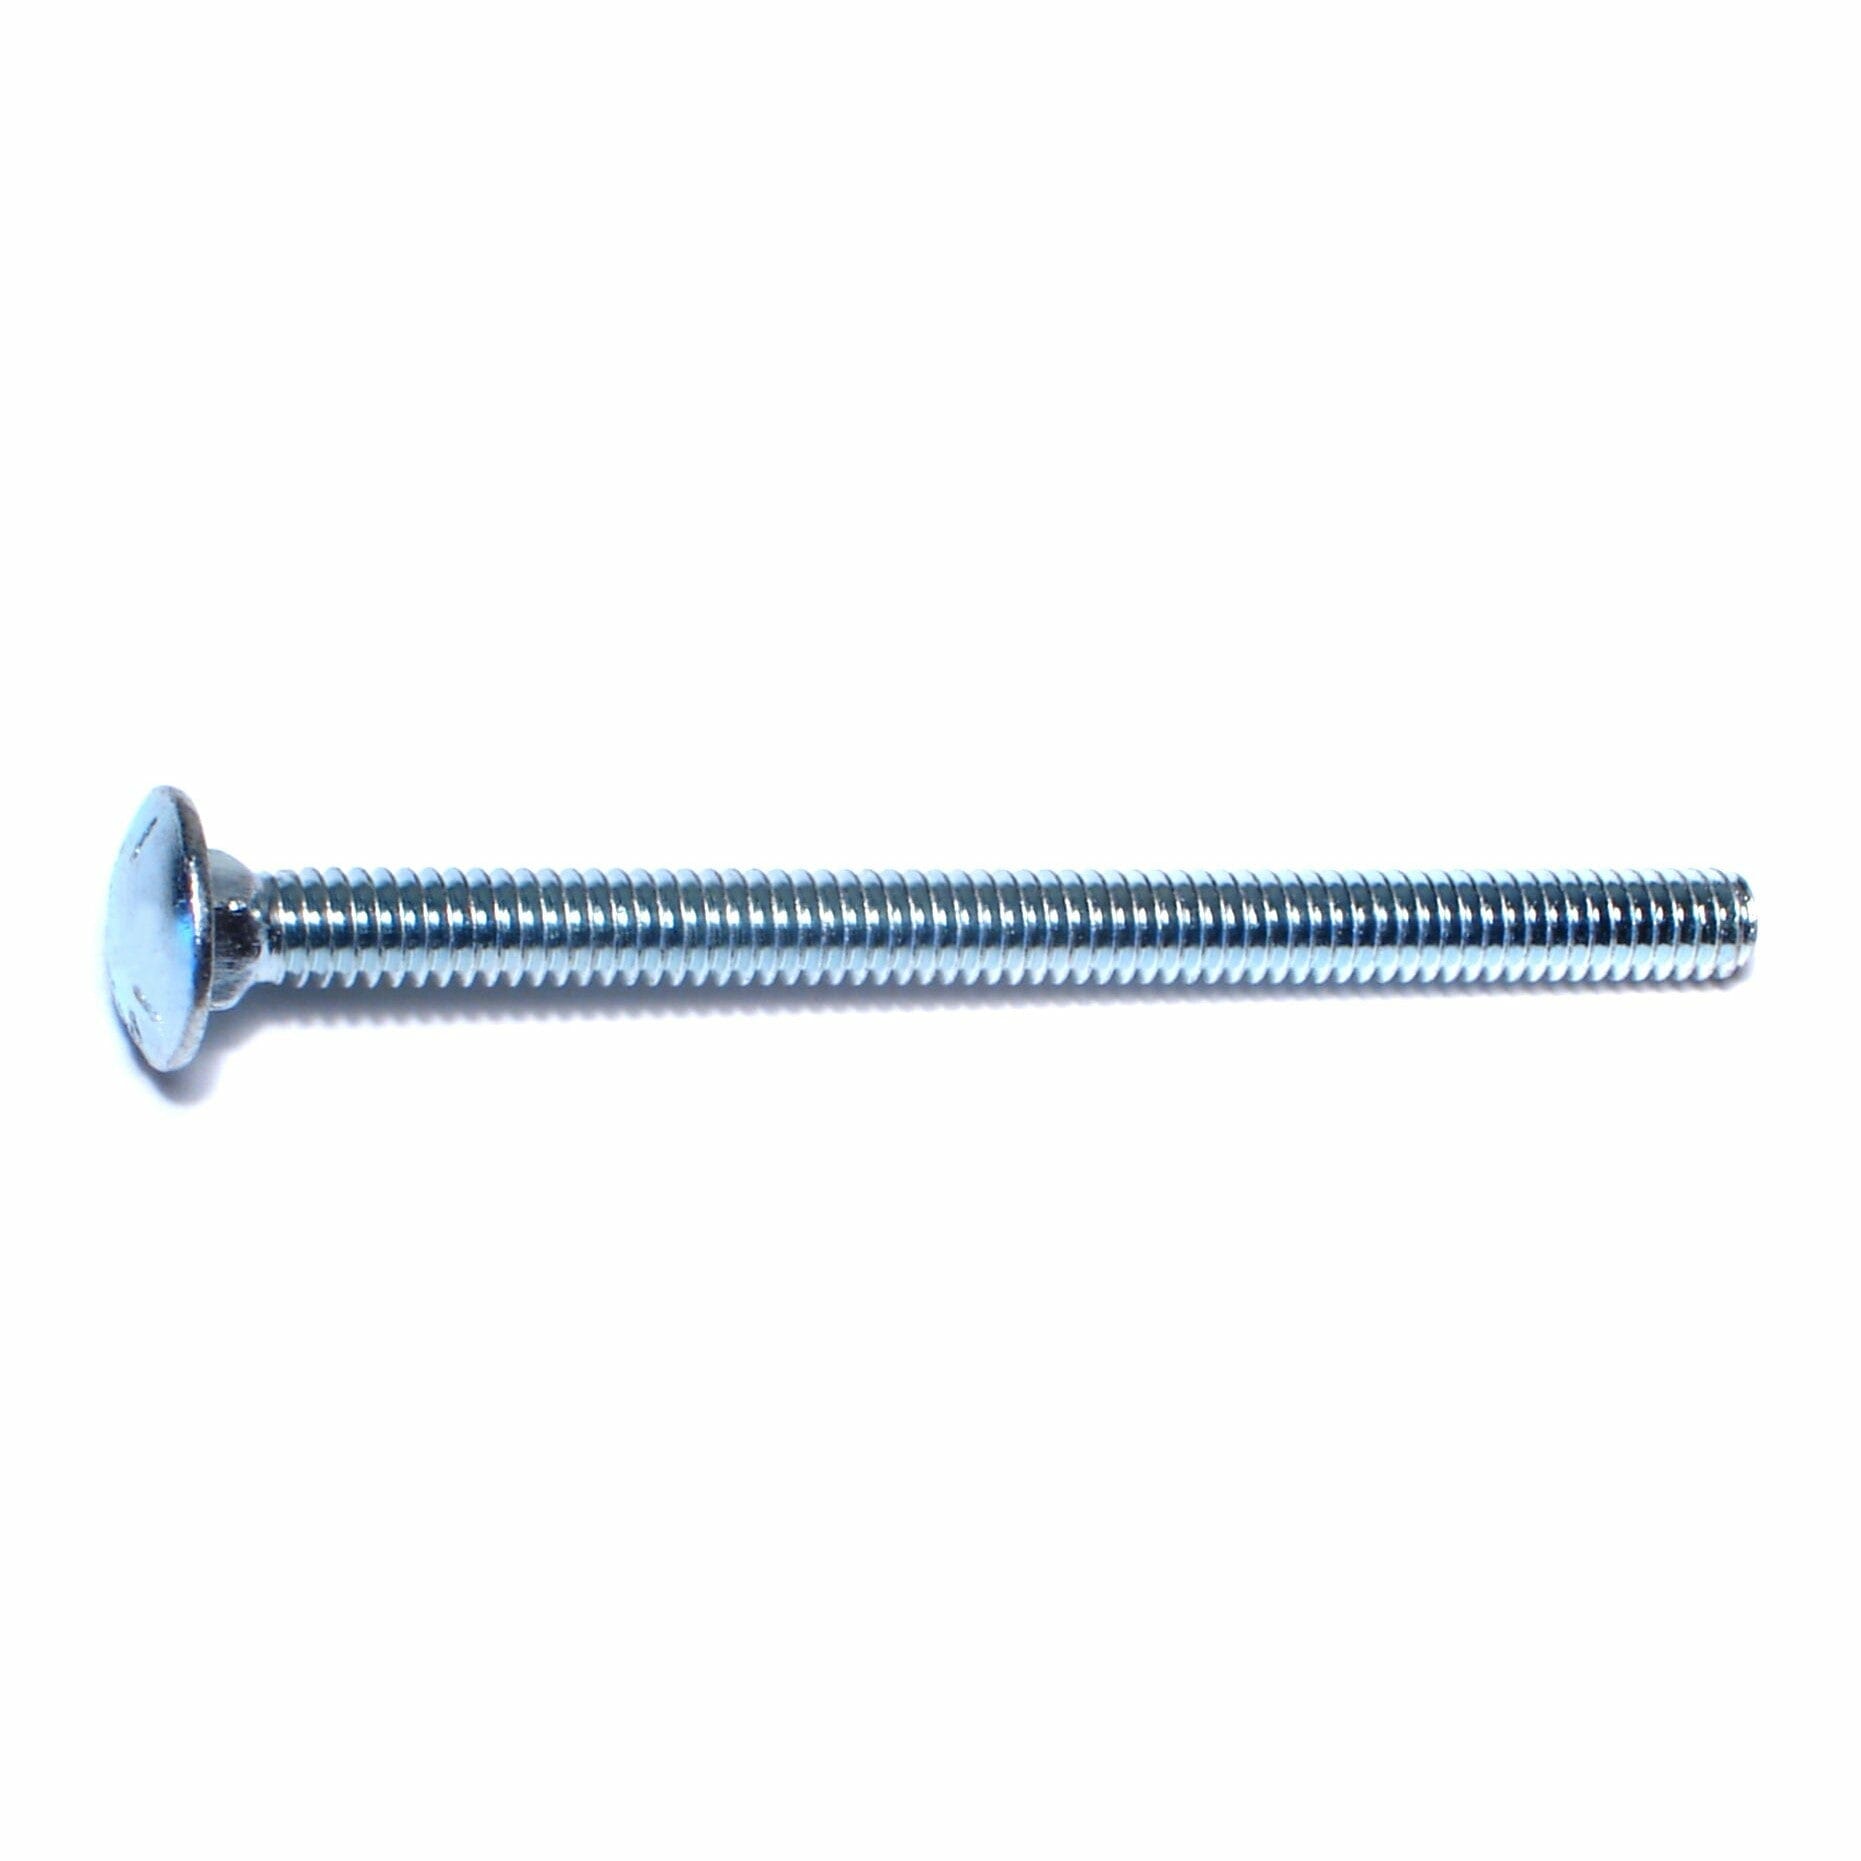 Fasteners, Bolts,1/4″-20 x 3-1/2″, Carriage Bolts